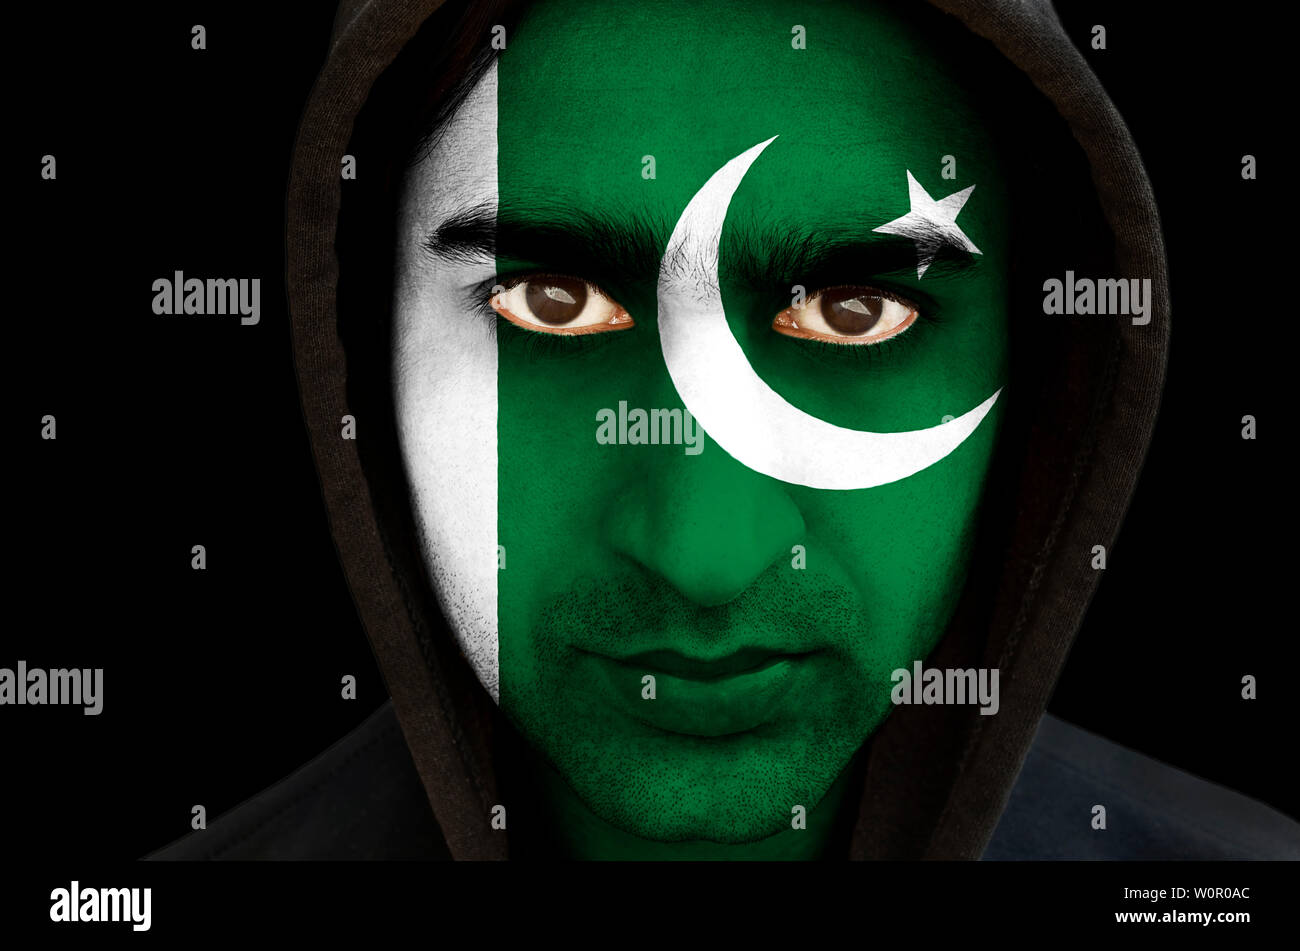 Portrait of a man with Pakistani flag face paint on black background Stock Photo